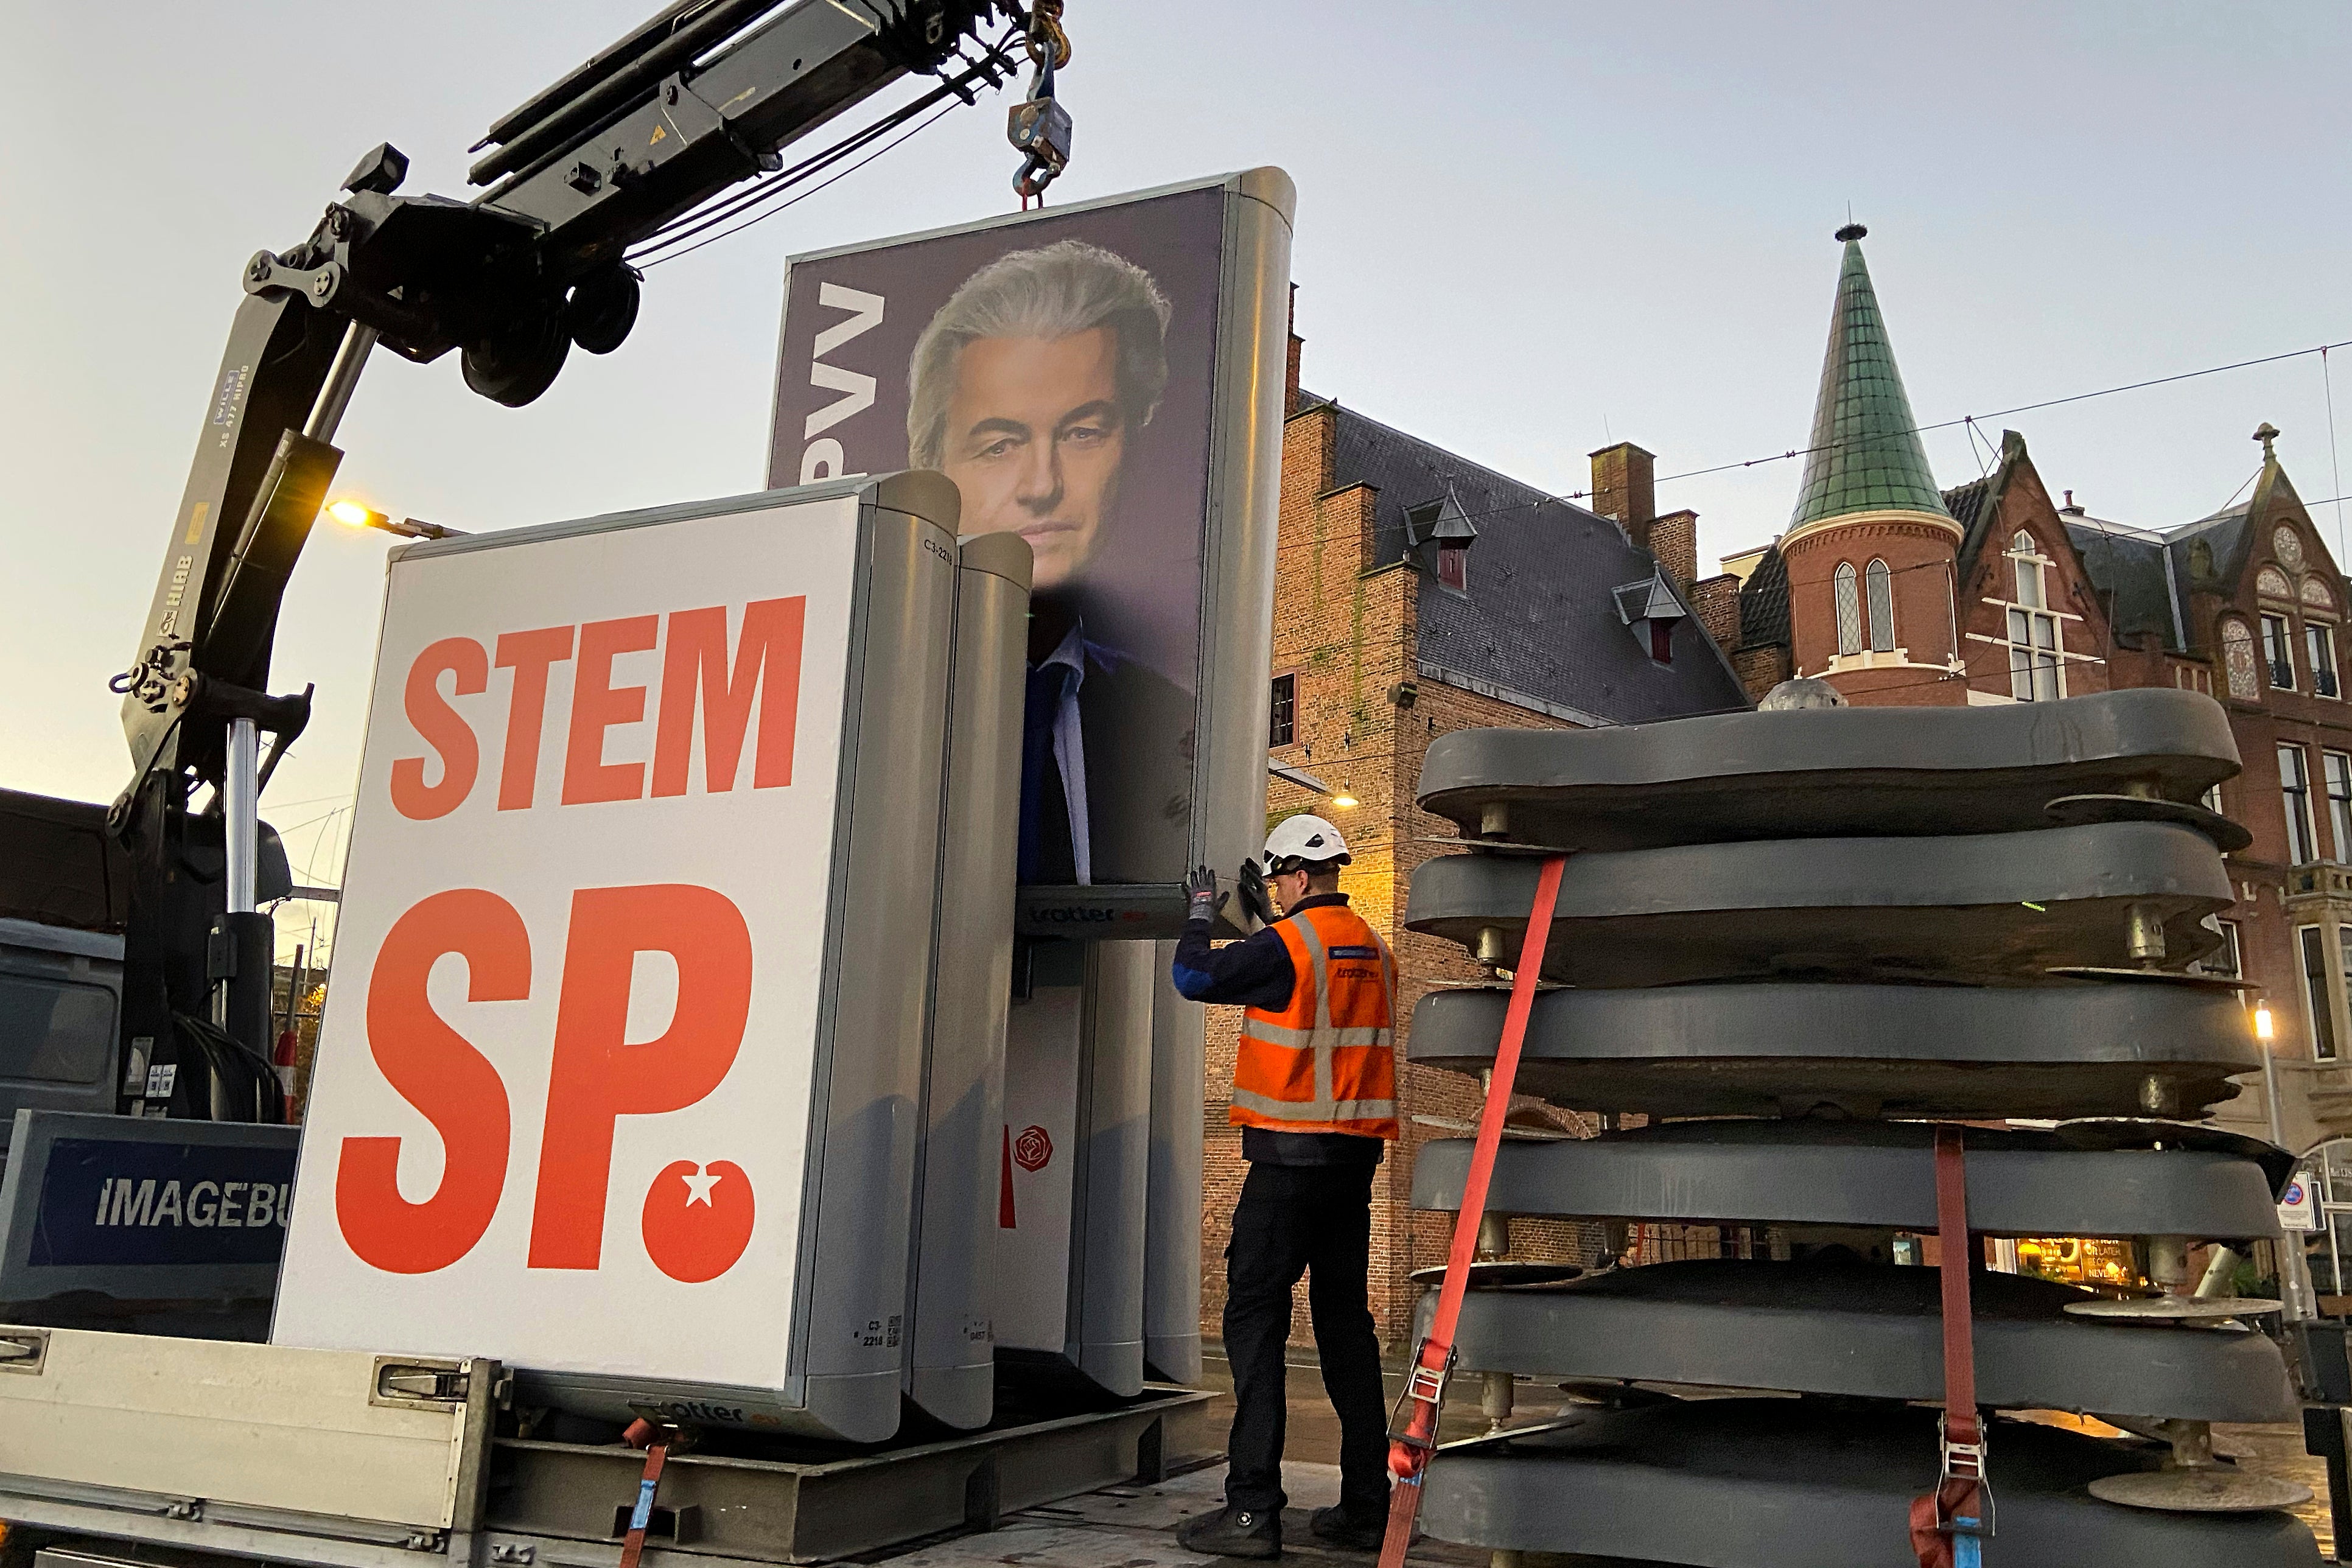 An eclection campaing poster of Geert Wilders' PVV party is removed in The Hague this morning